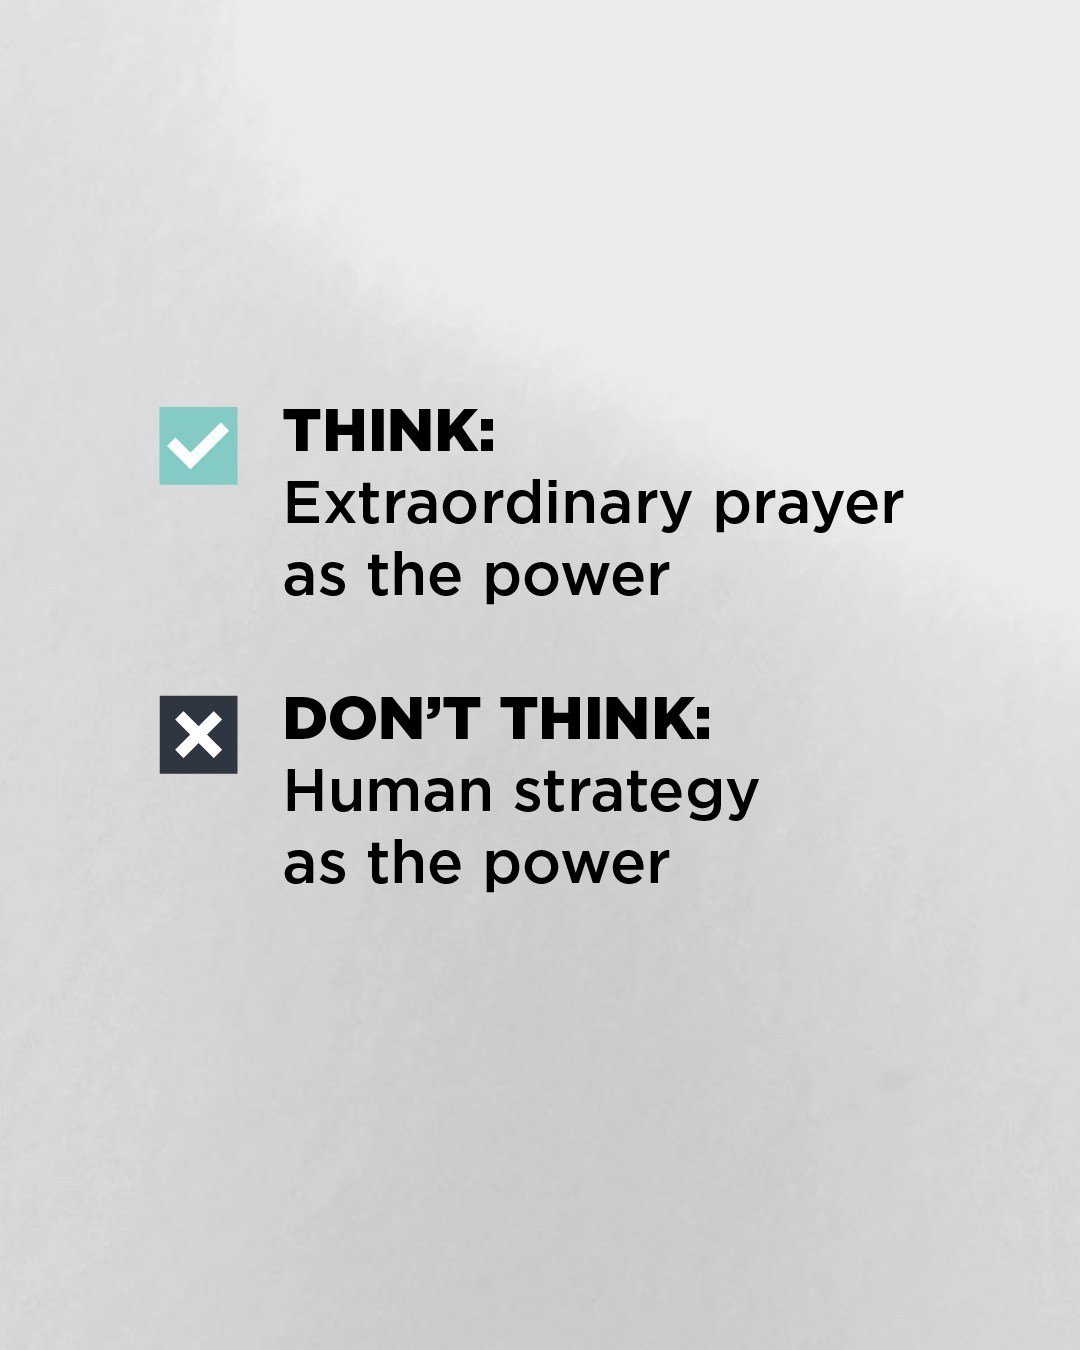 Paradigm shifts for a movement mindset: #1. 
🖤 Double tap if you've seen extraordinary prayer out-power human strategy. 

The Missionary Pathway is a guide for navigating these necessary paradigm shifts. 
☝️ Grab the free primer in the toolkit. 
✌️S